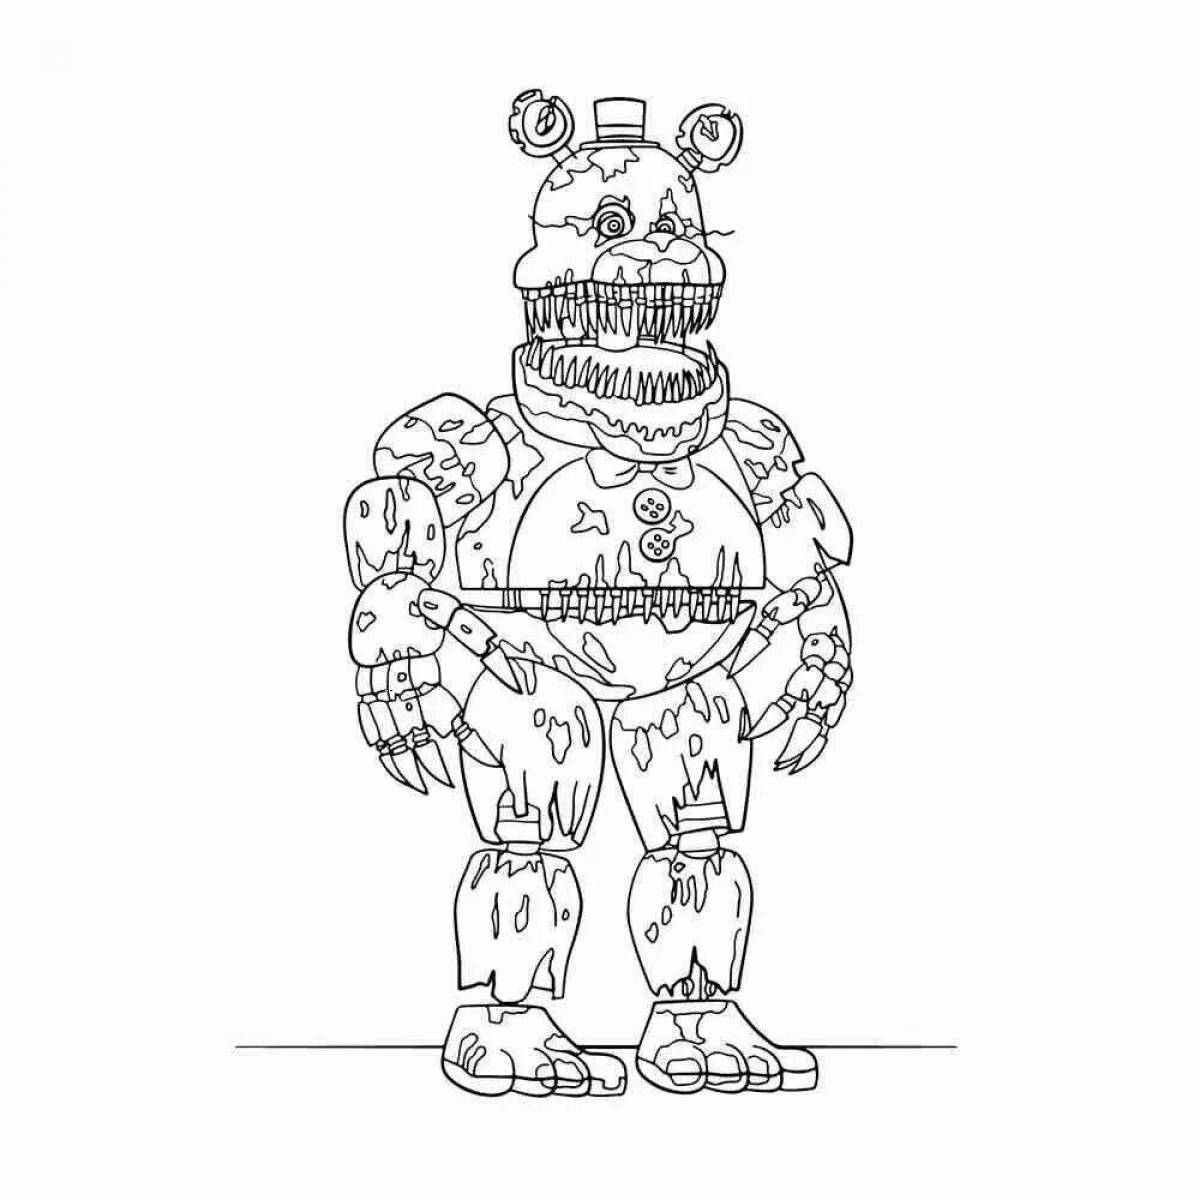 Molten Freddy coloring page